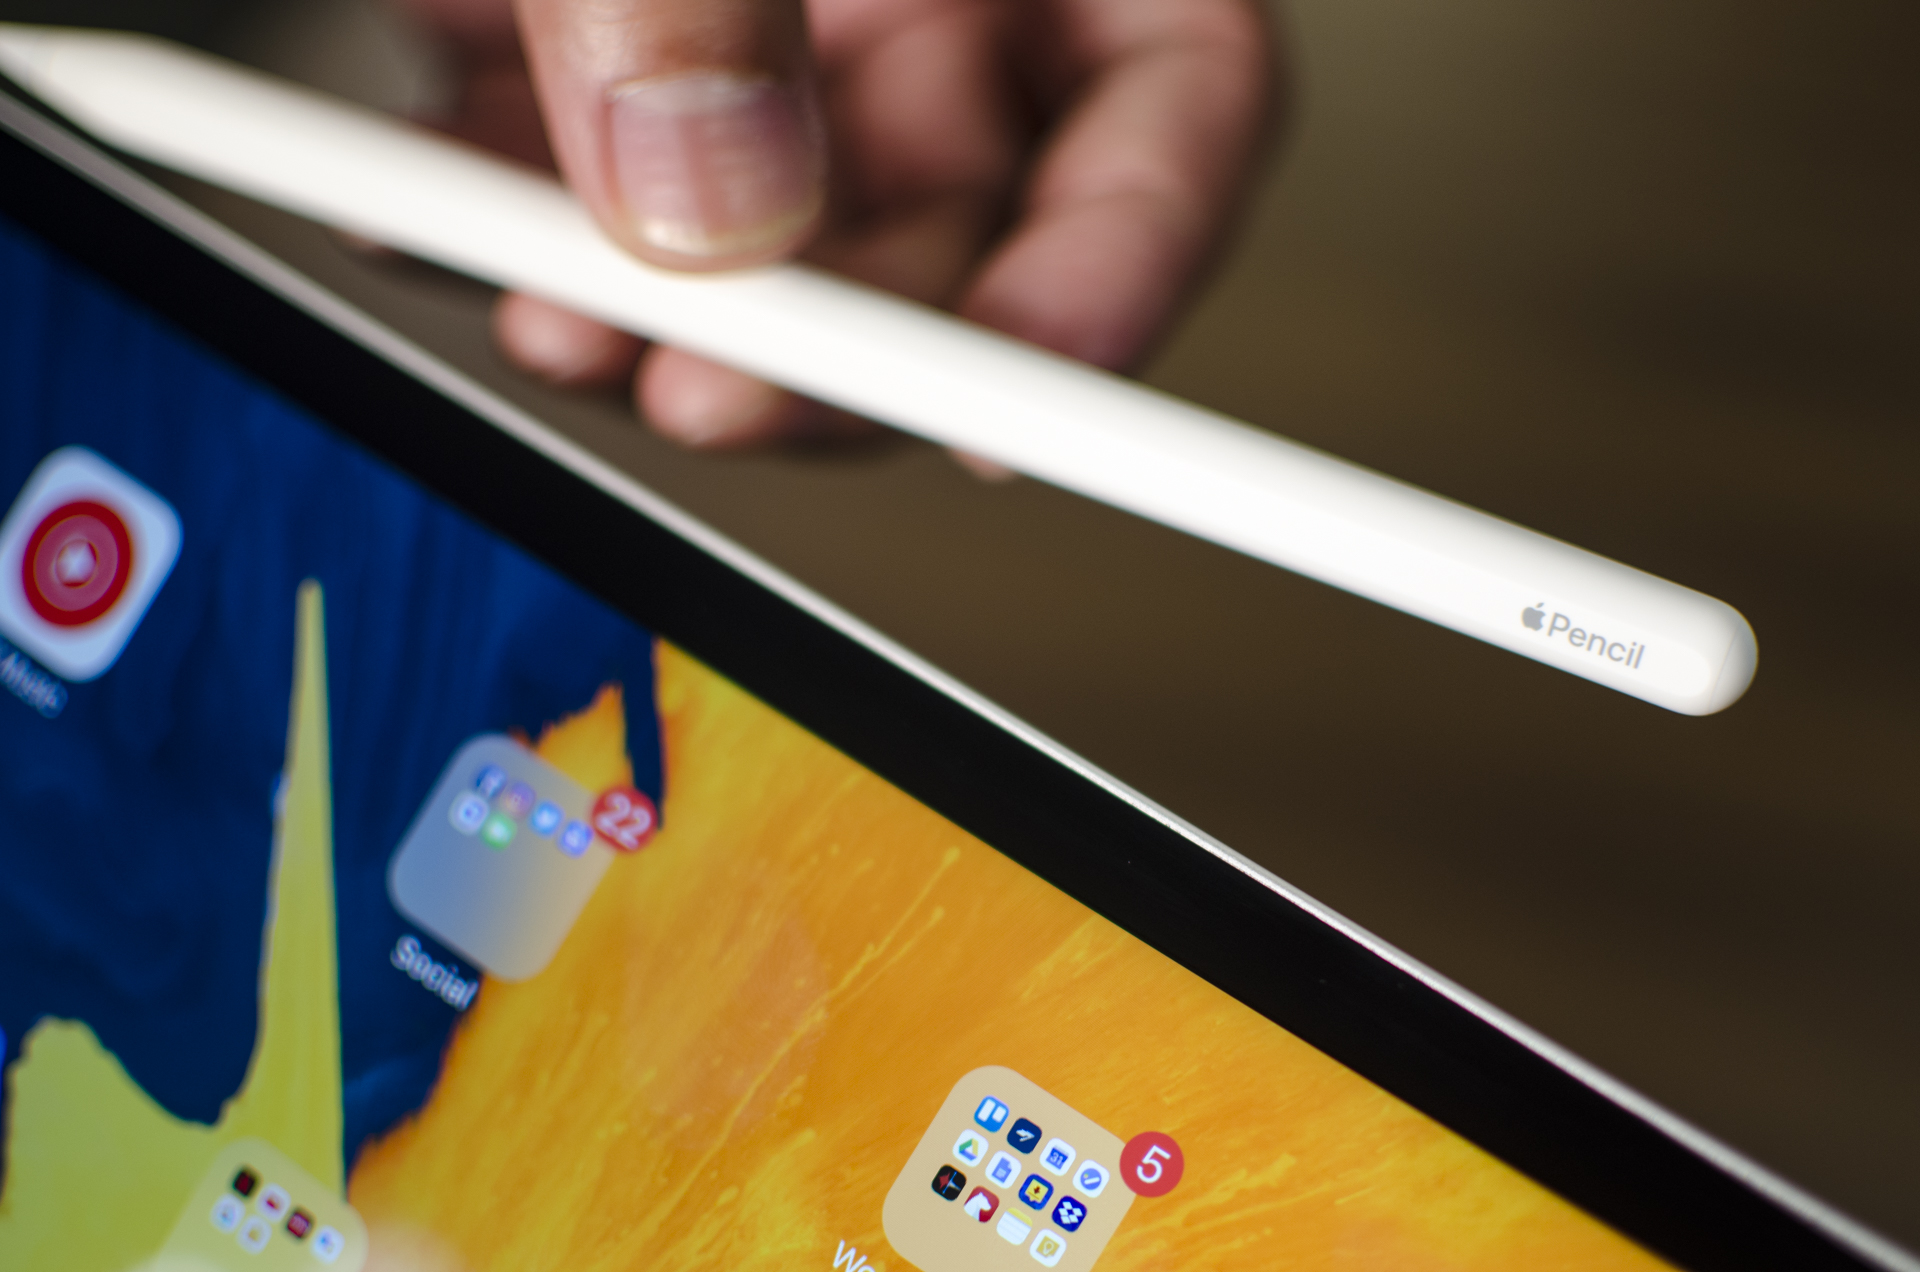 Ipad Pro (2018) Review: The Best Tablet Money Can Buy | Digital Trends